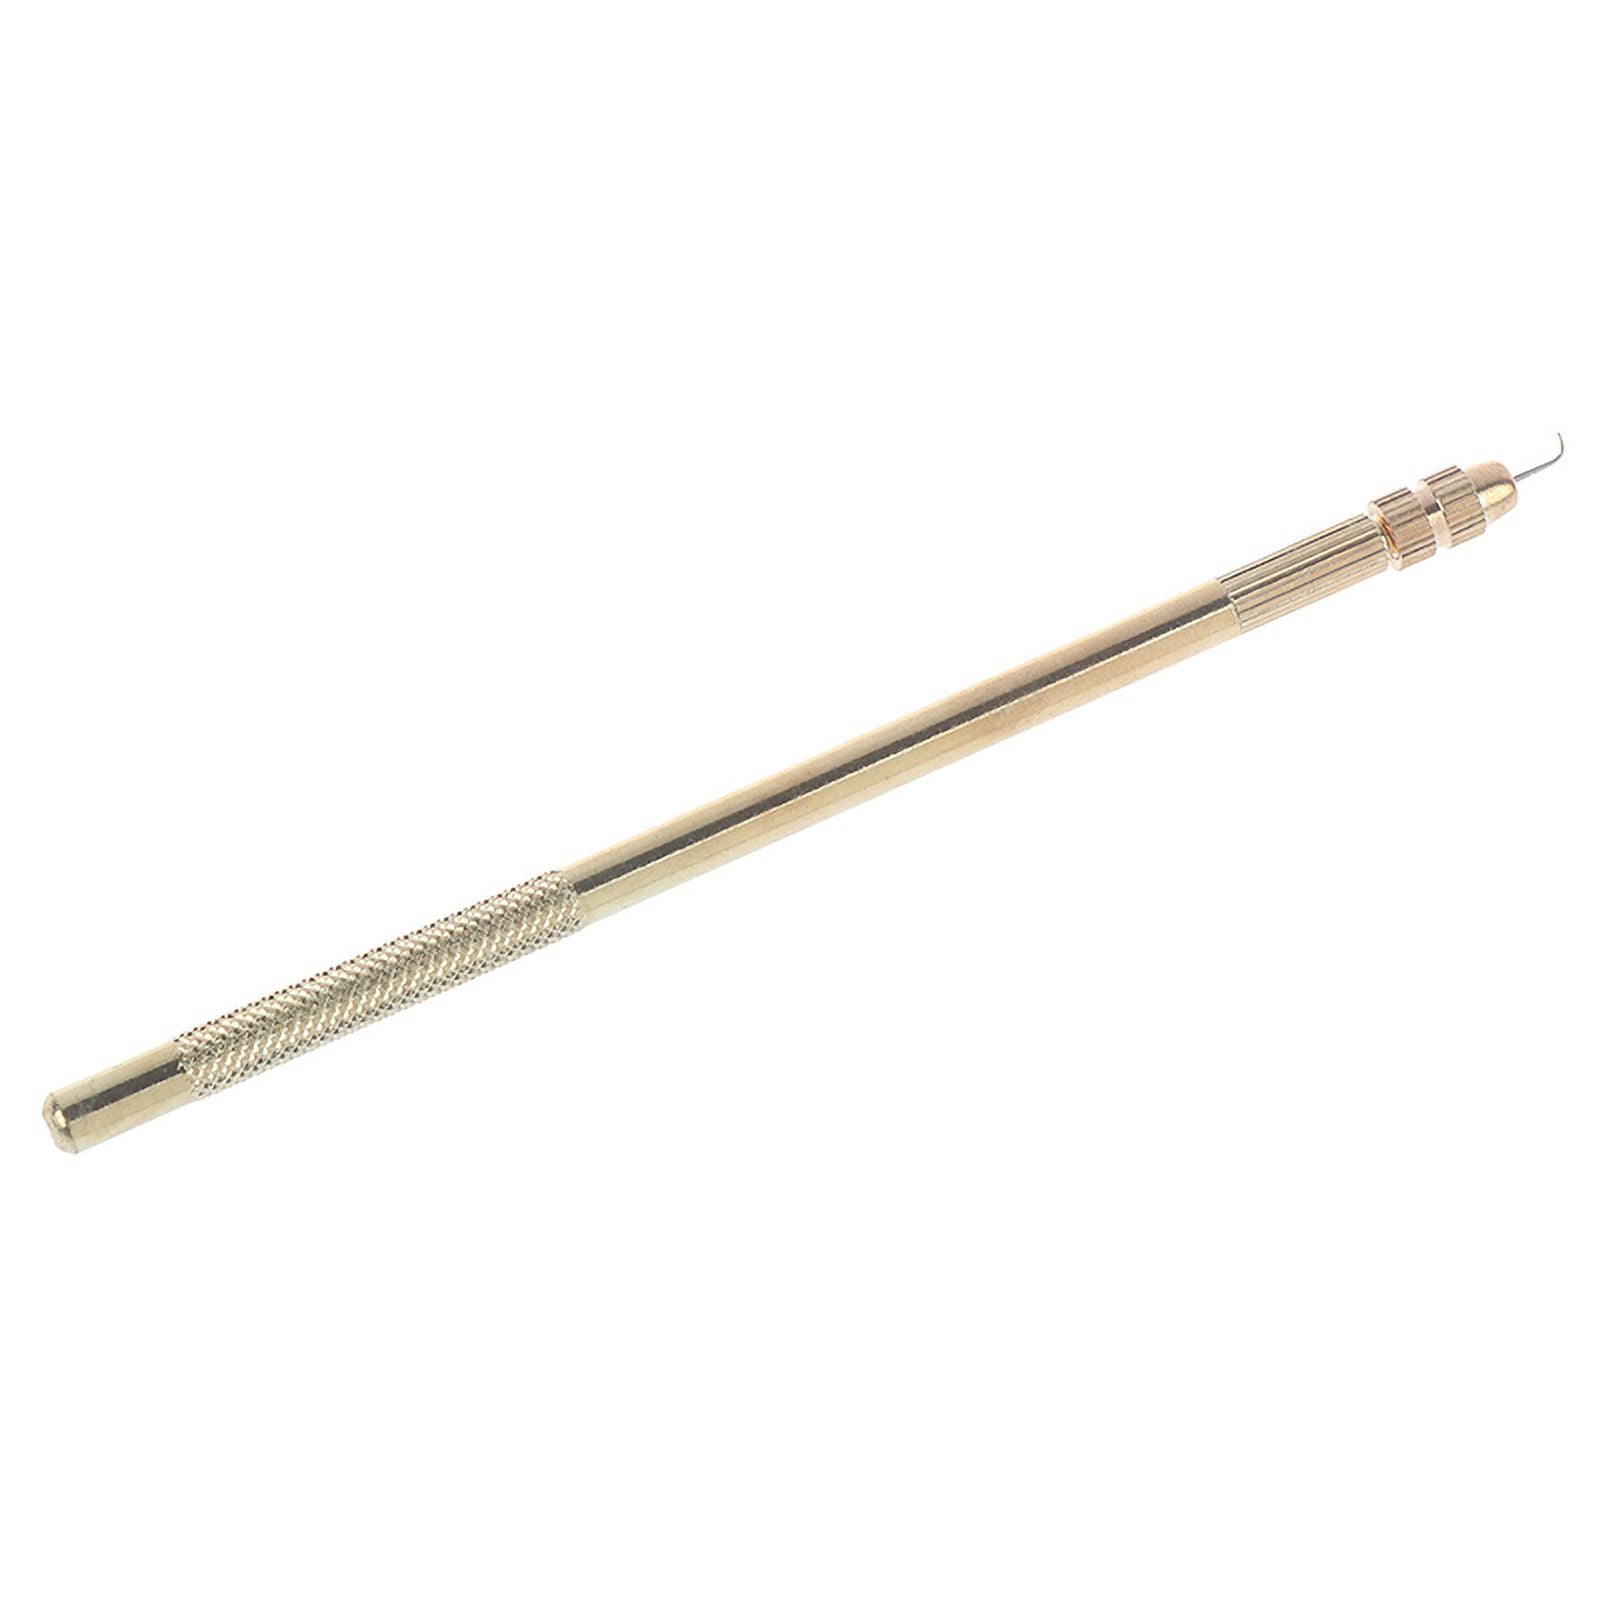 Ventilating Needle for Lace Wig - AliLeader Brass Ventilating Holder and 3  Different Size Stainless Steel Needles (1-2, 2-3, 3-4) for Make/Repair Lace